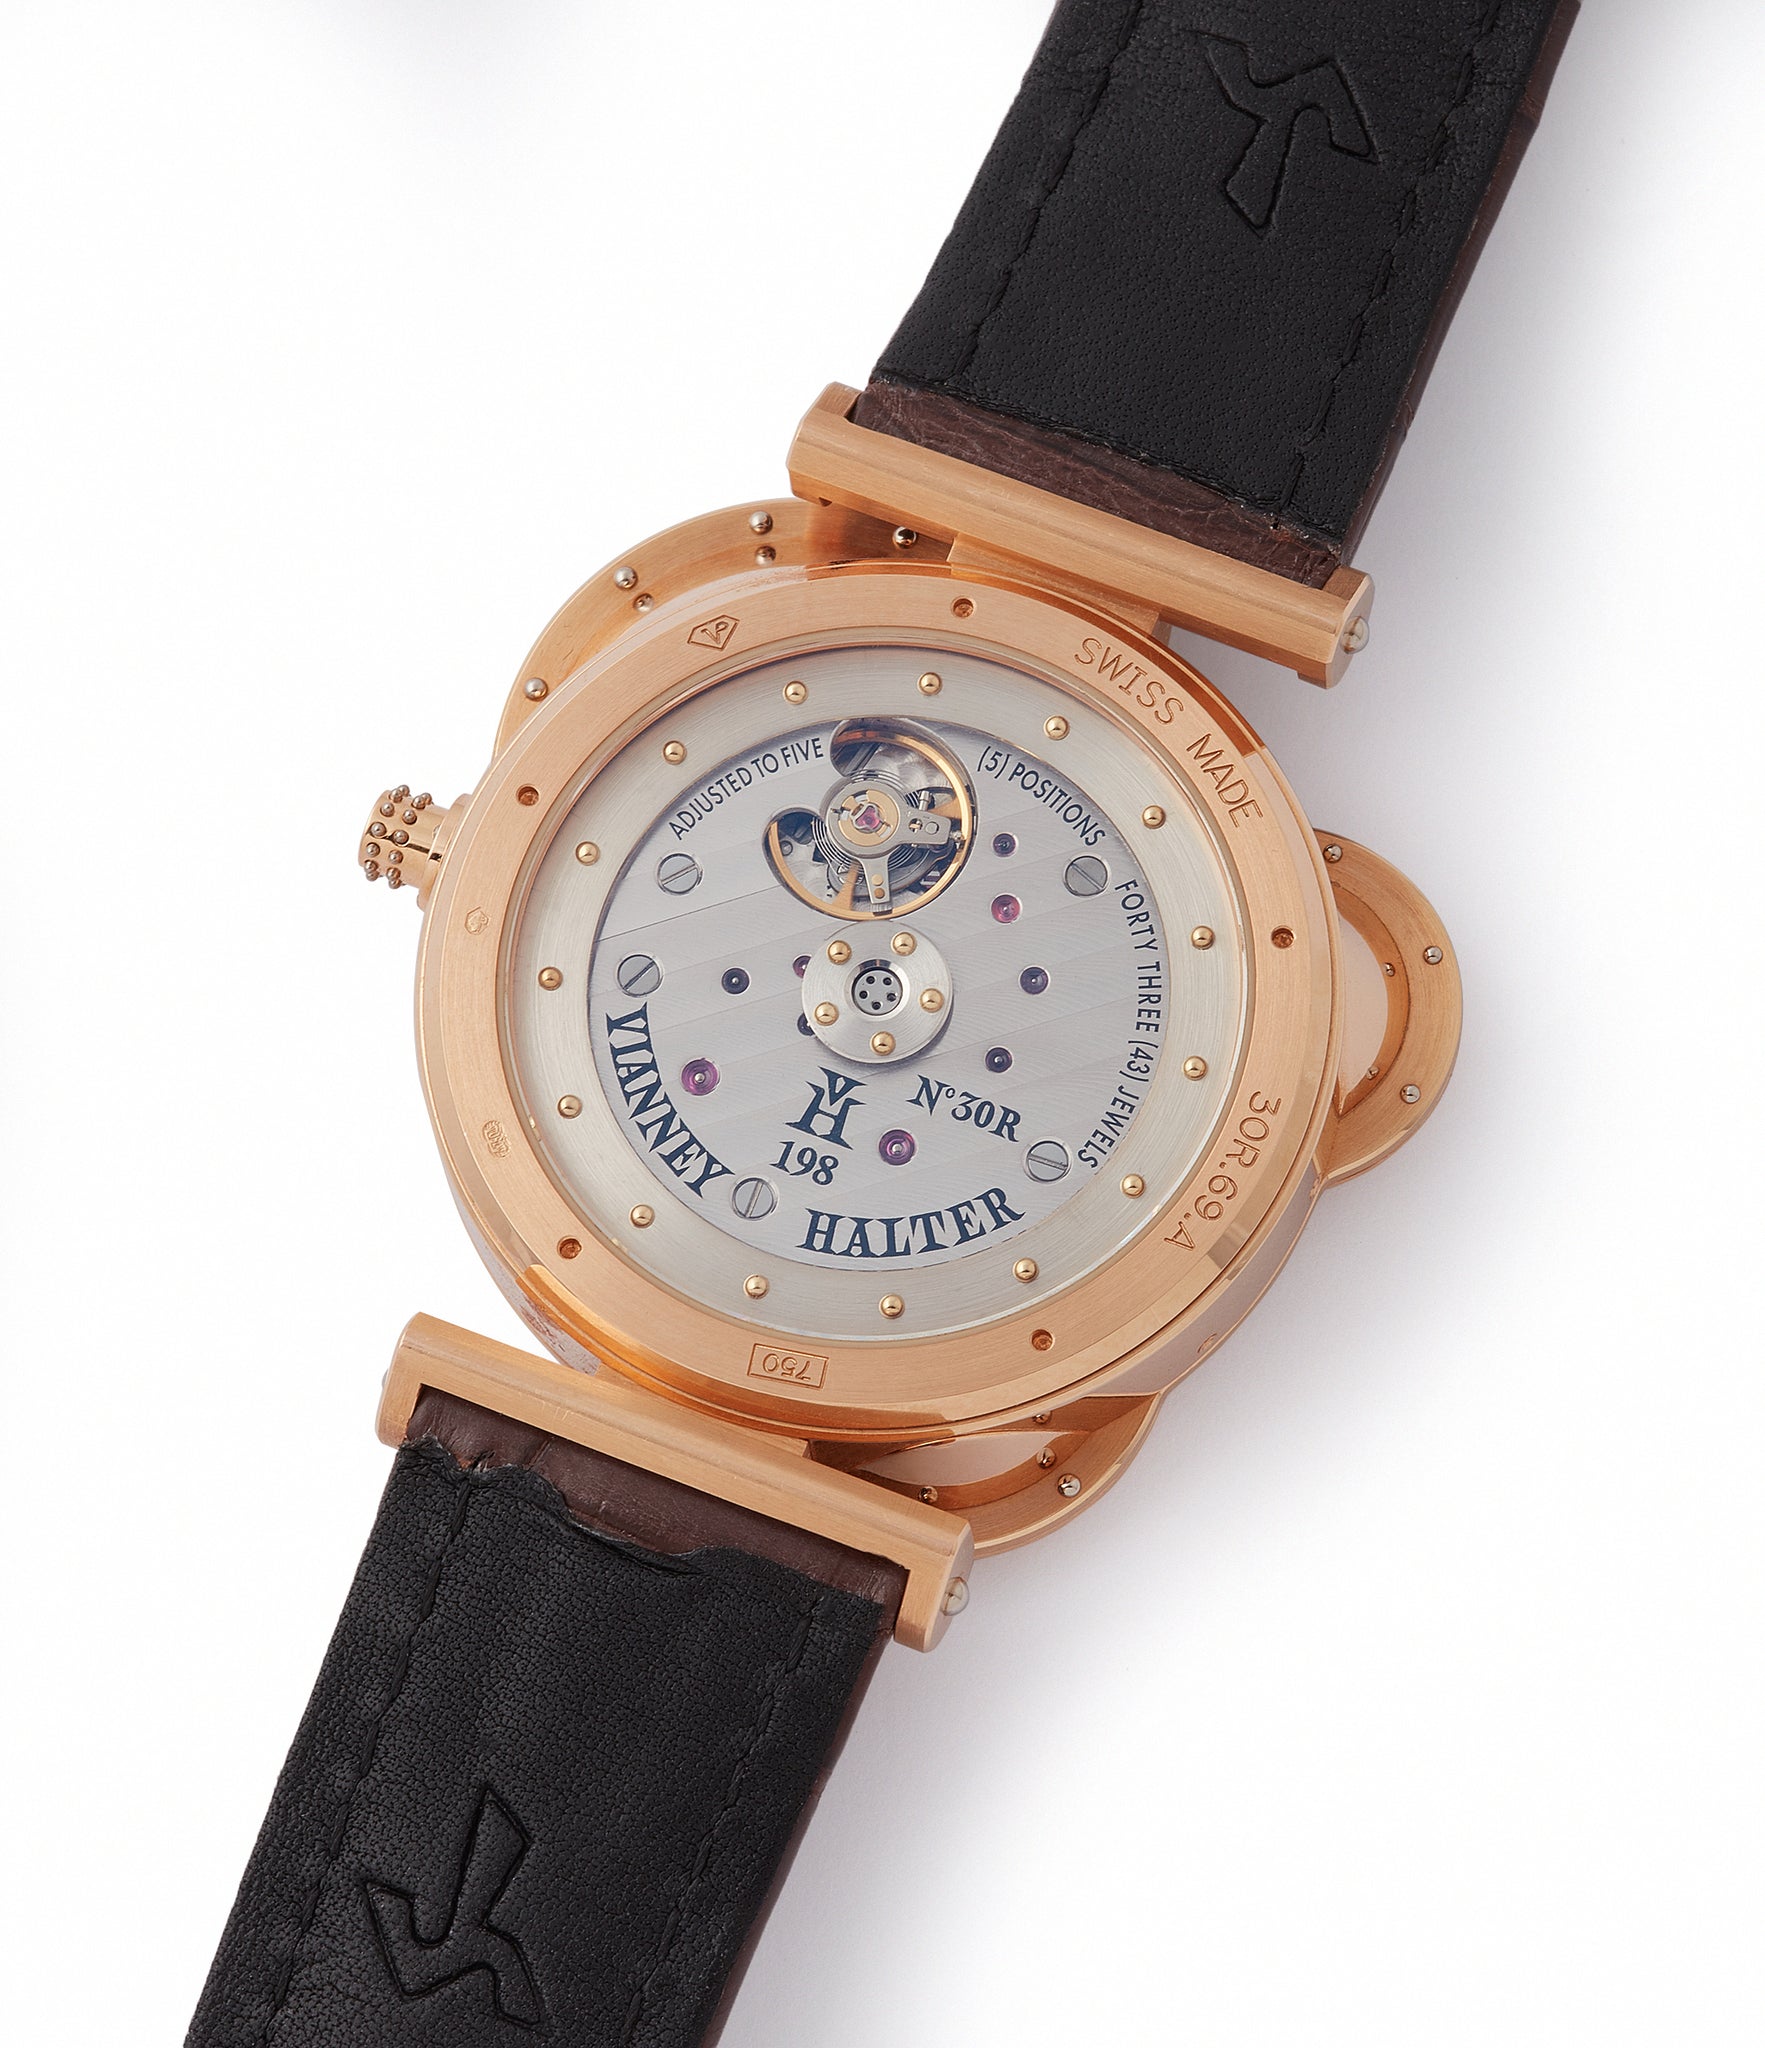 hand-made Cal. VH198 automatic in-house early Vianney Halter Antiqua Perpetual Calendar rose gold independent watchmaker for sale online at A Collected Man London UK specialist of rare watches